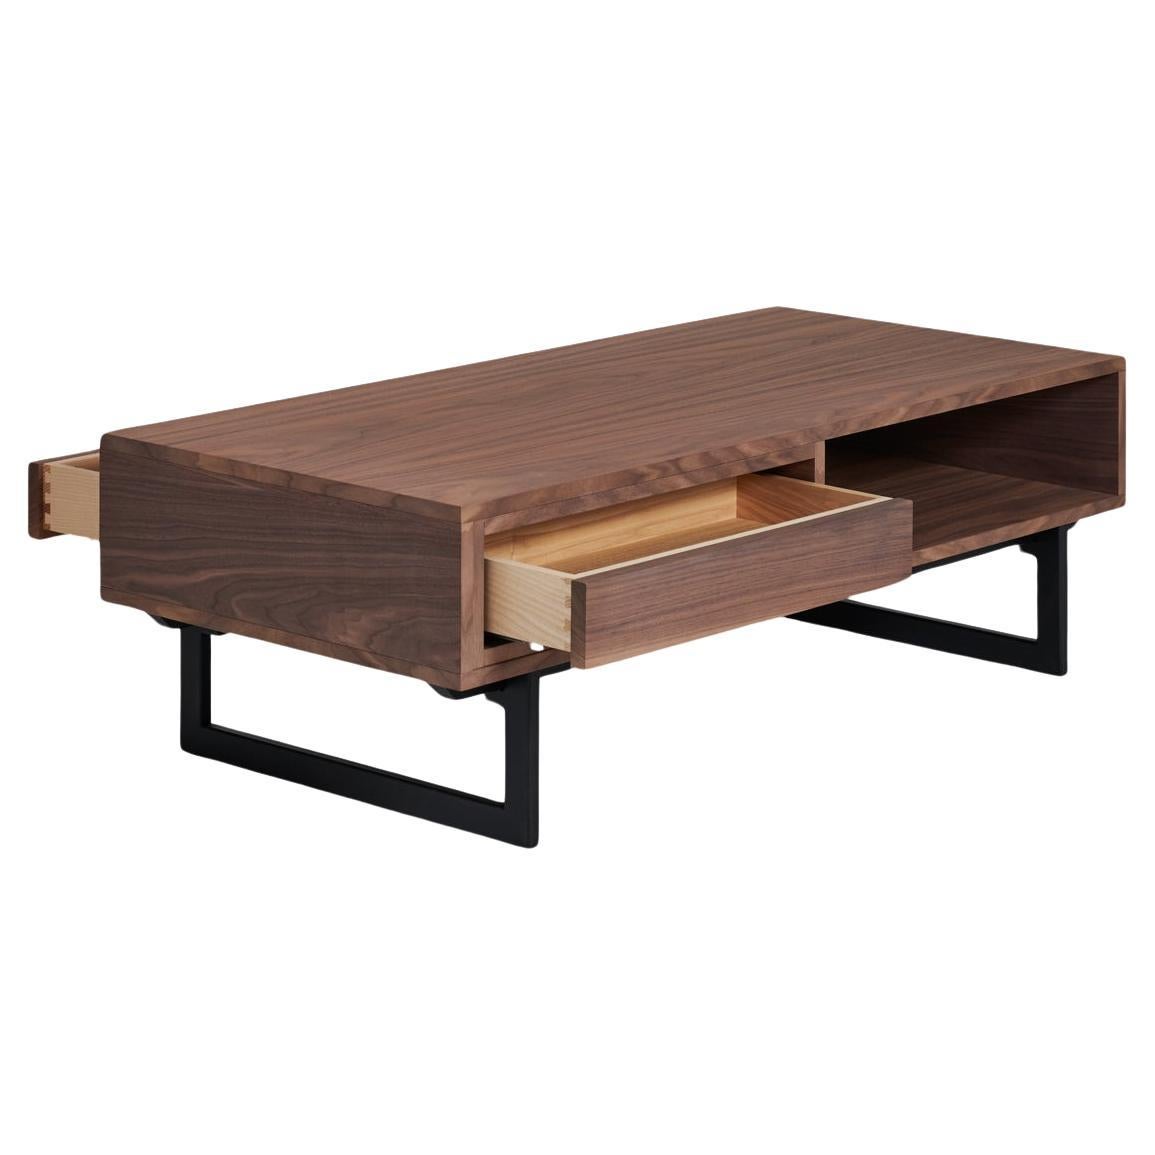 2-drawer coffee table in walnut & black iron feet, design by Christophe Lecomte For Sale